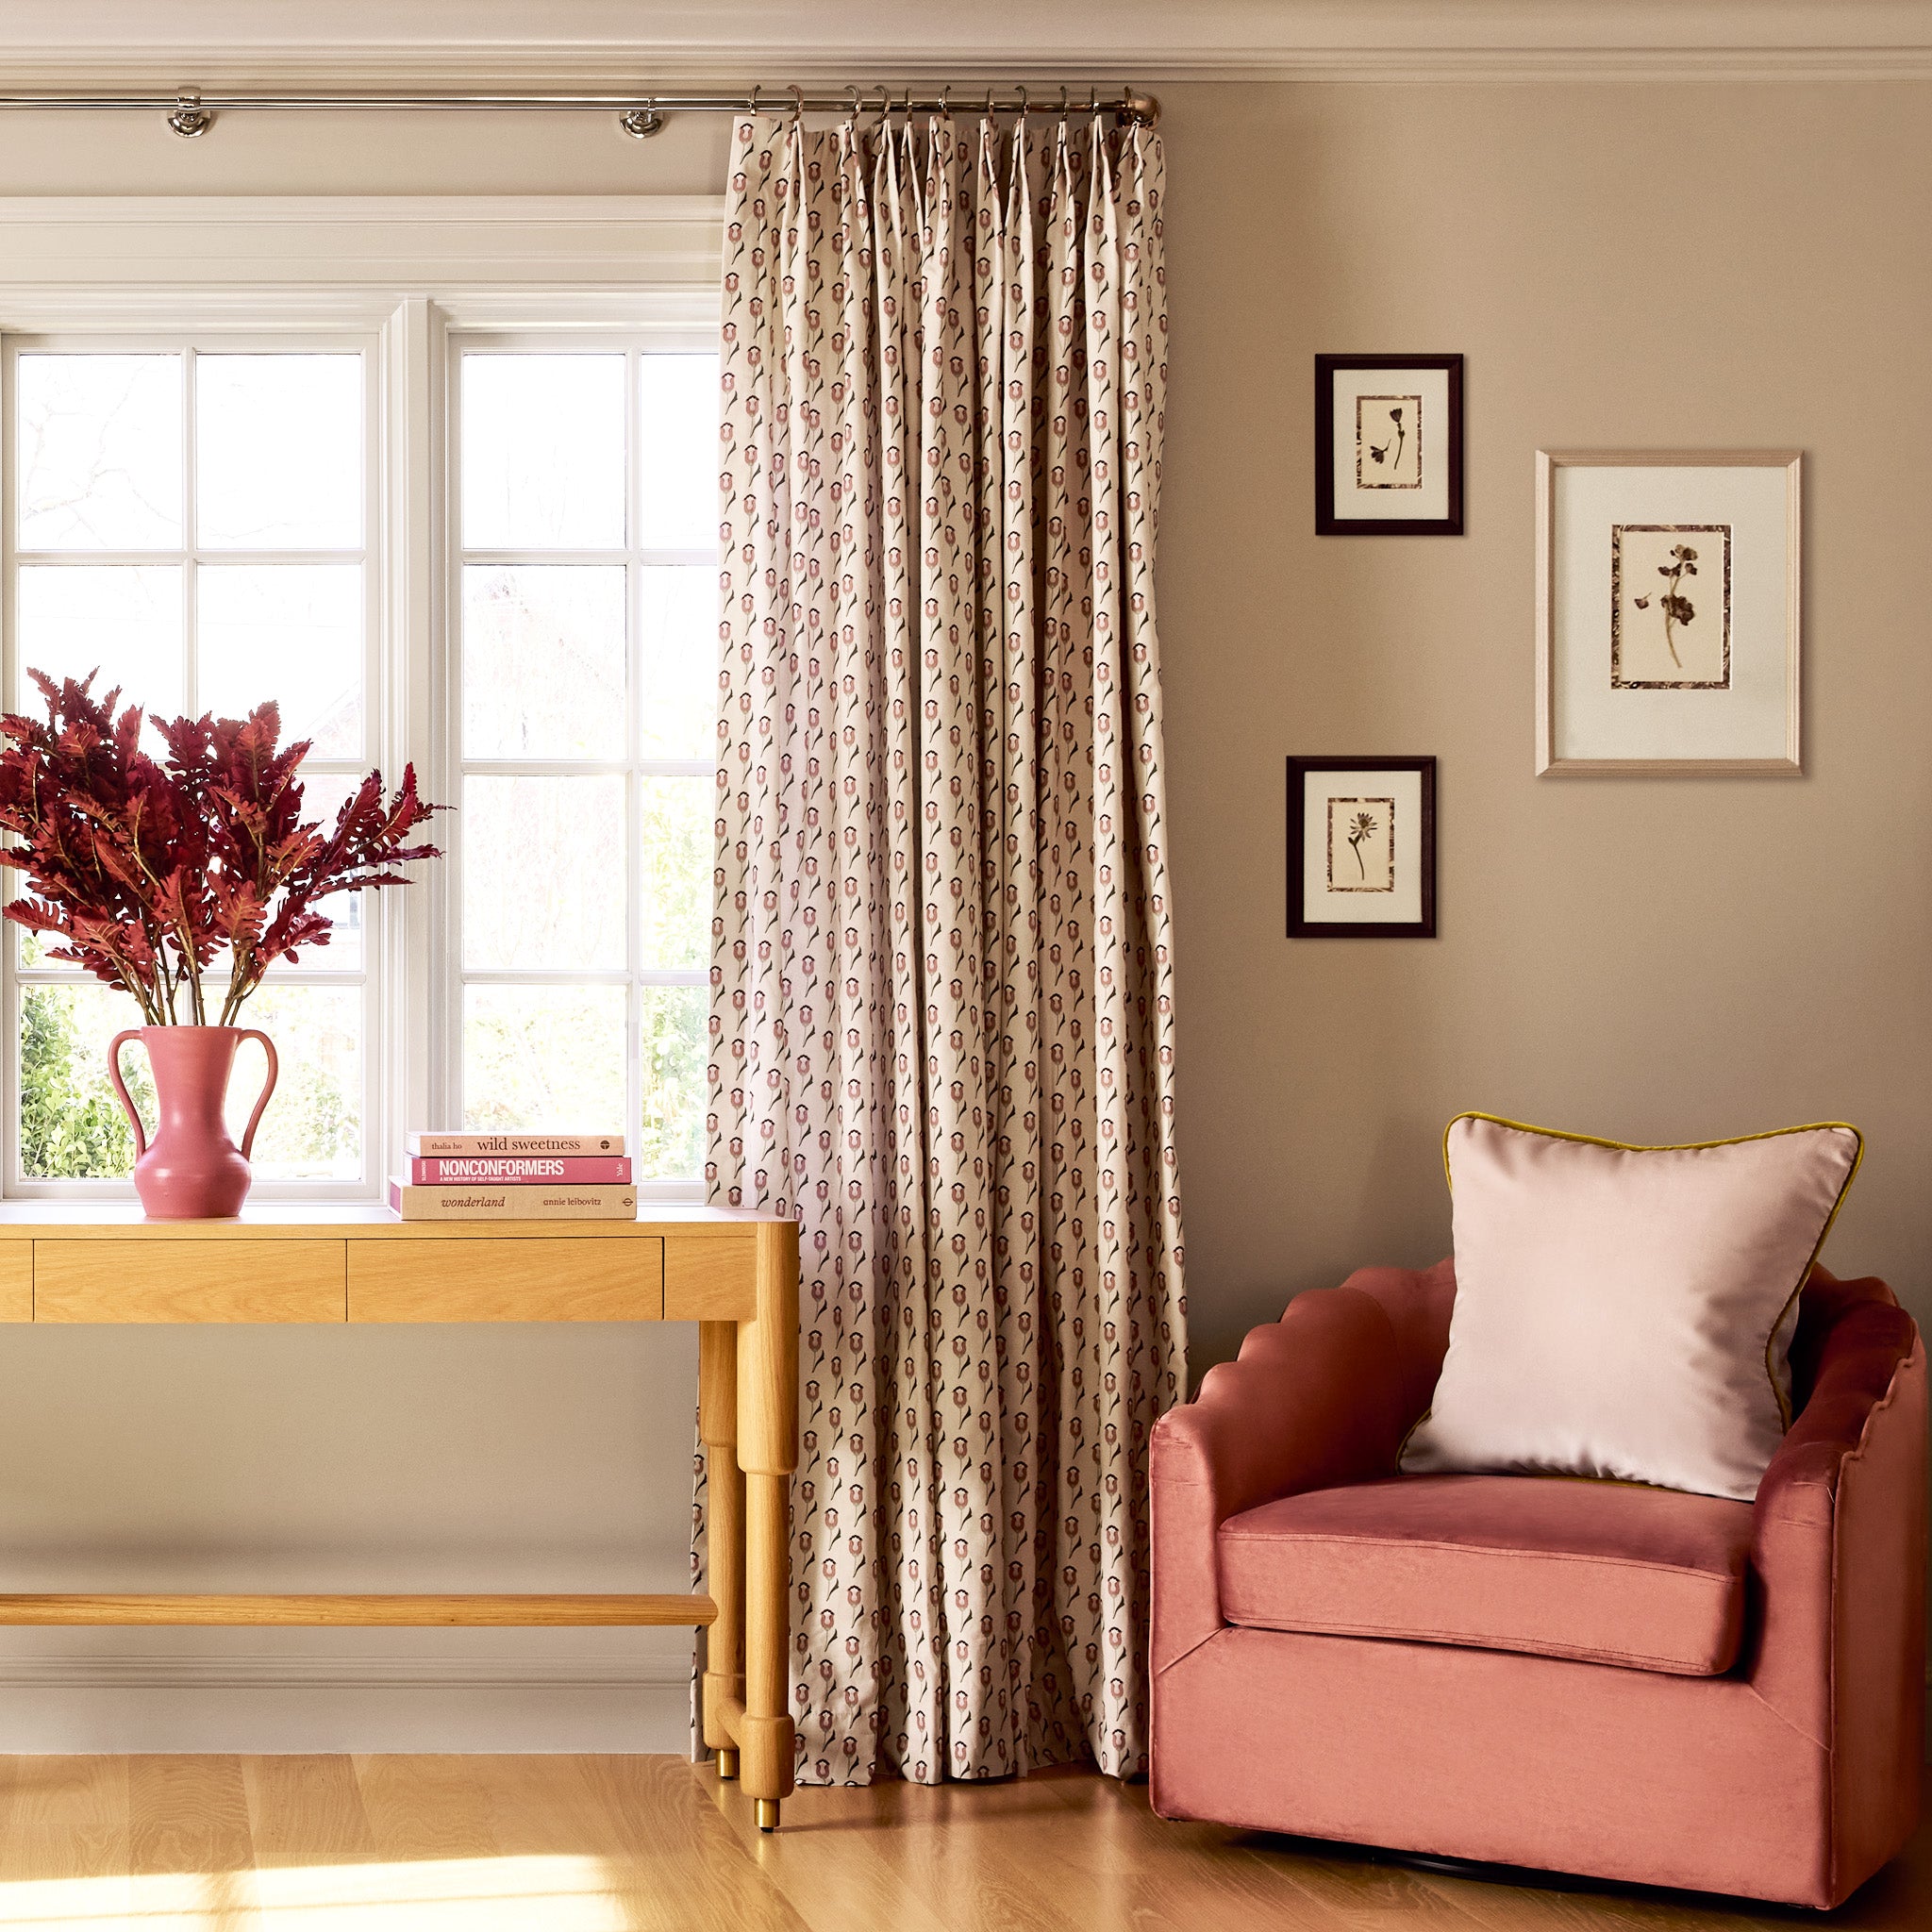 abstract floral pink and green printed curtains on a metal rod in front of an illuminated window with a coral colored chair and botanical artwork on the walls